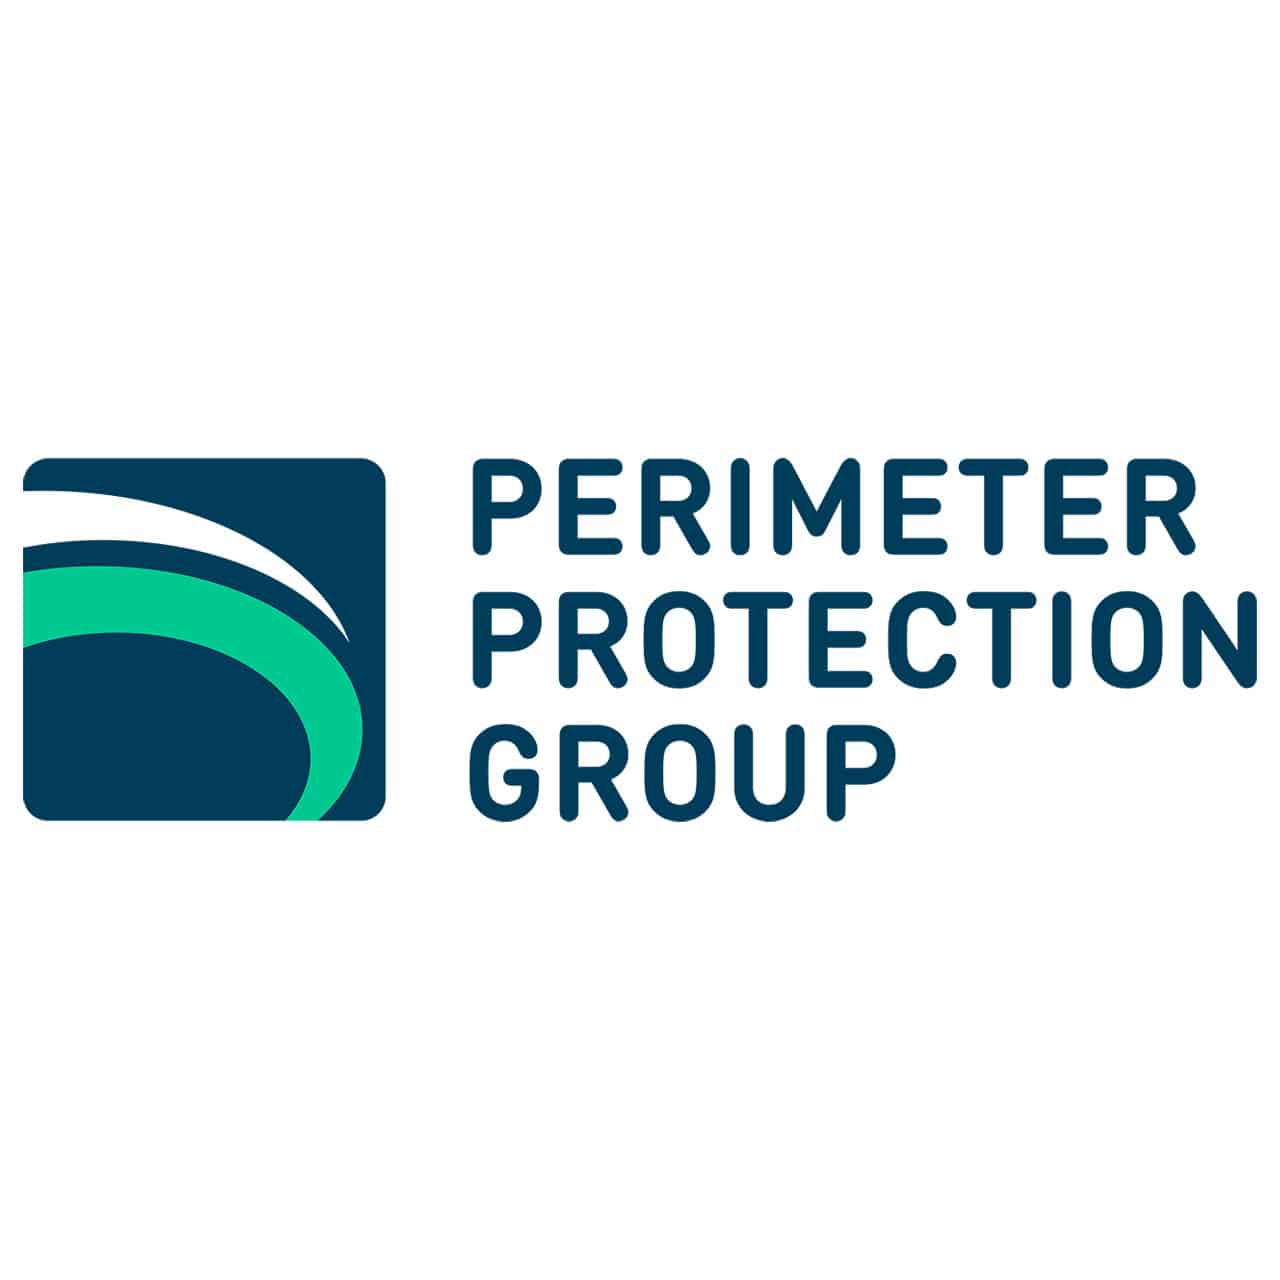 Perimeter Protection Group – Market Leading Security Technology